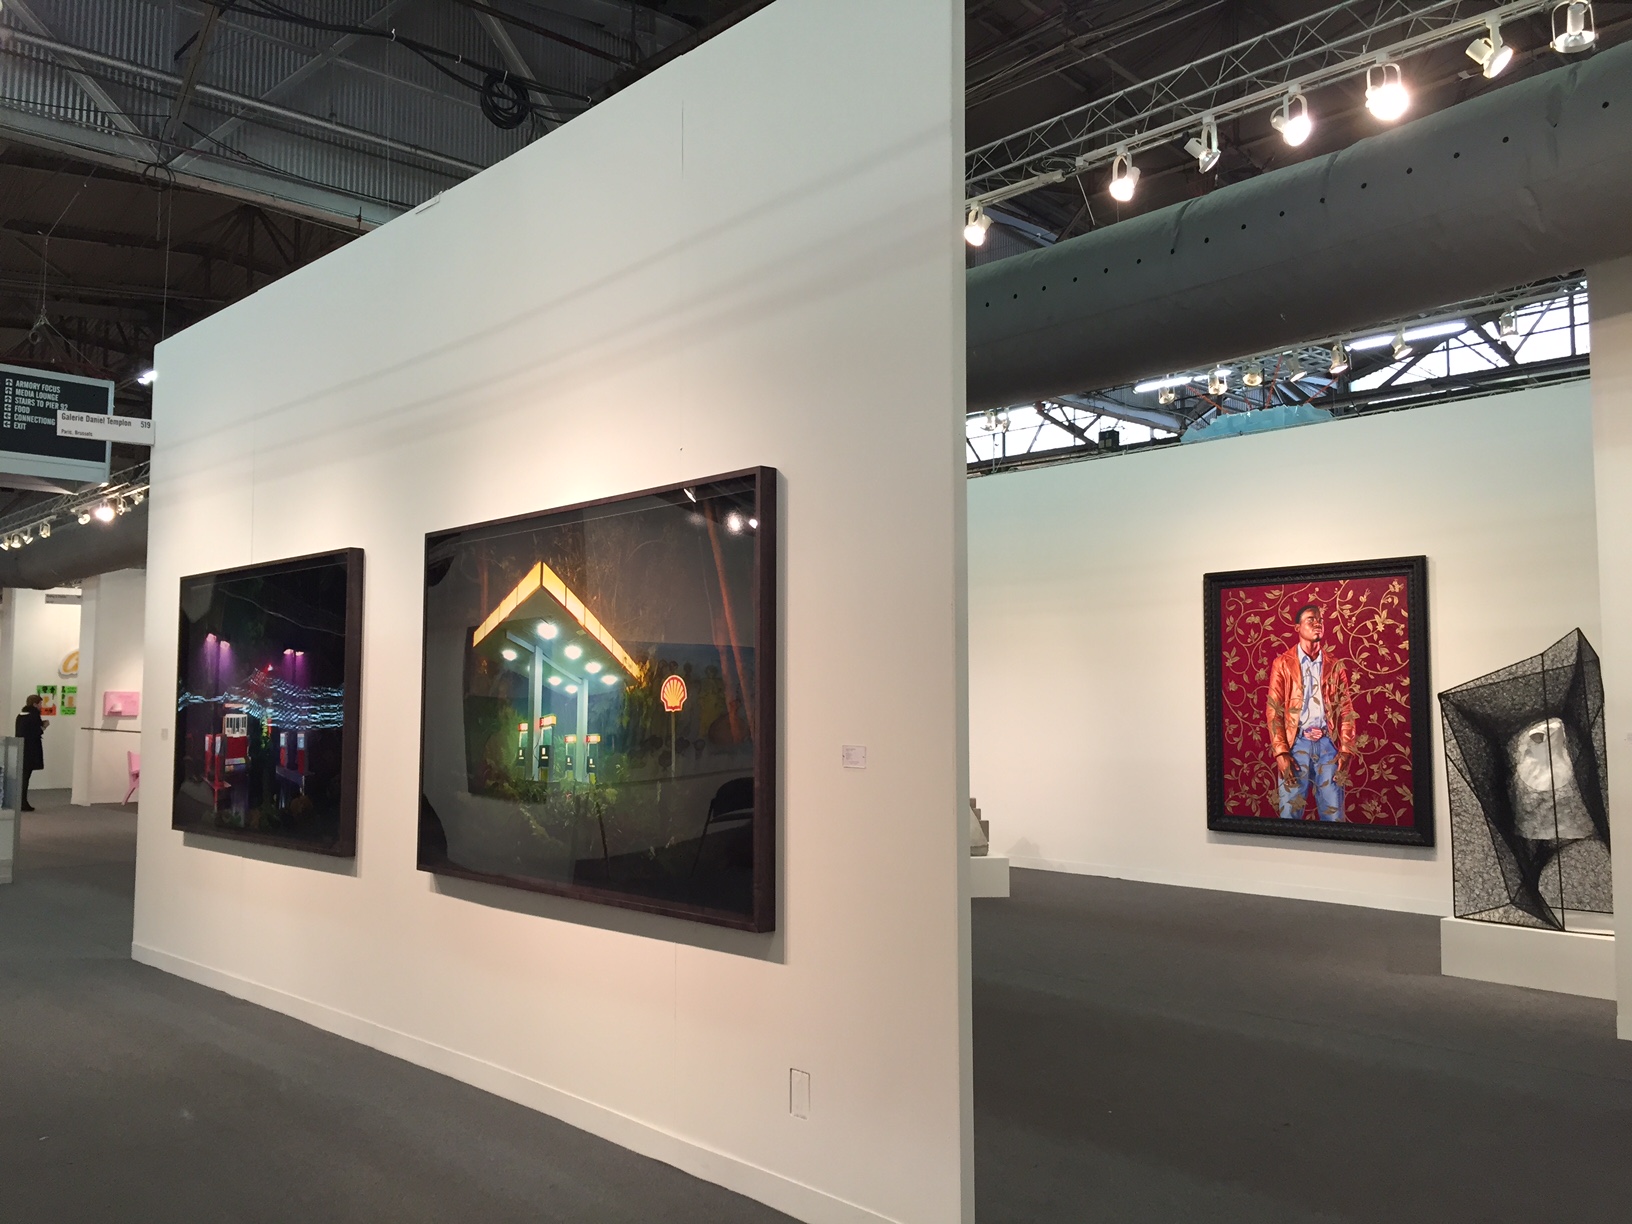 David LaChapelle | THE ARMORY SHOW, GALERIE DANIEL TEMPLON, New York City, USA, March 5 - March 8, 2015 | 2